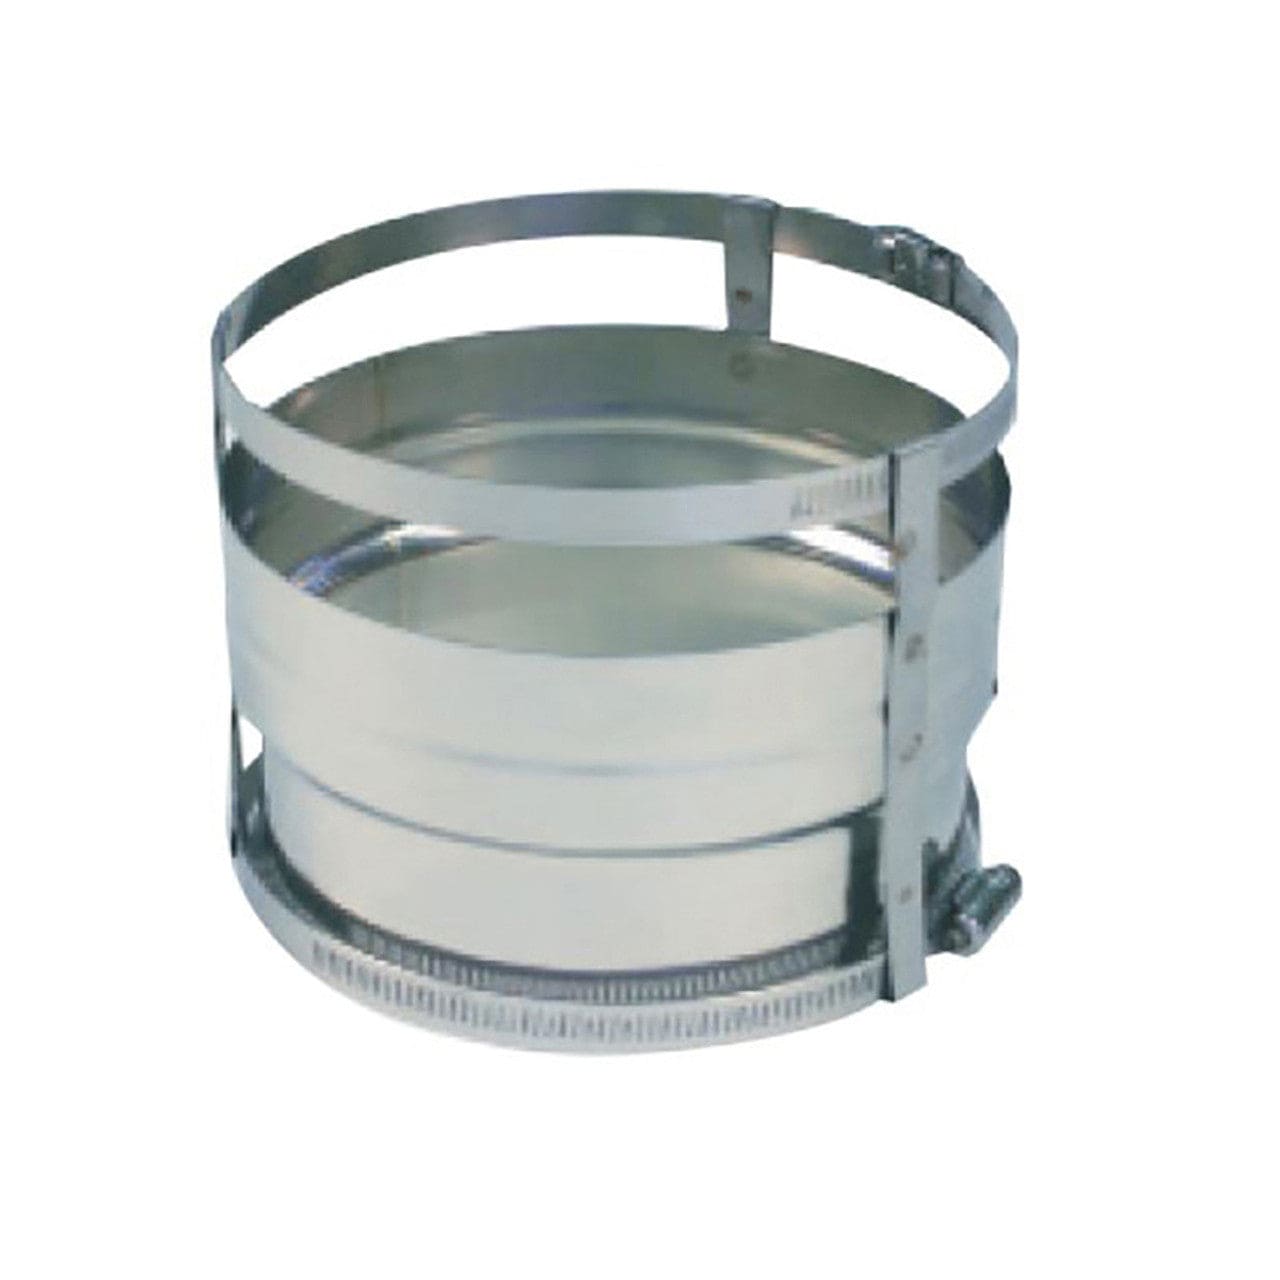 10" Forever Flex 316Ti-Alloy Stainless Steel Light Flex Dripless Quick Connector - QCLF10 - Chimney Cricket